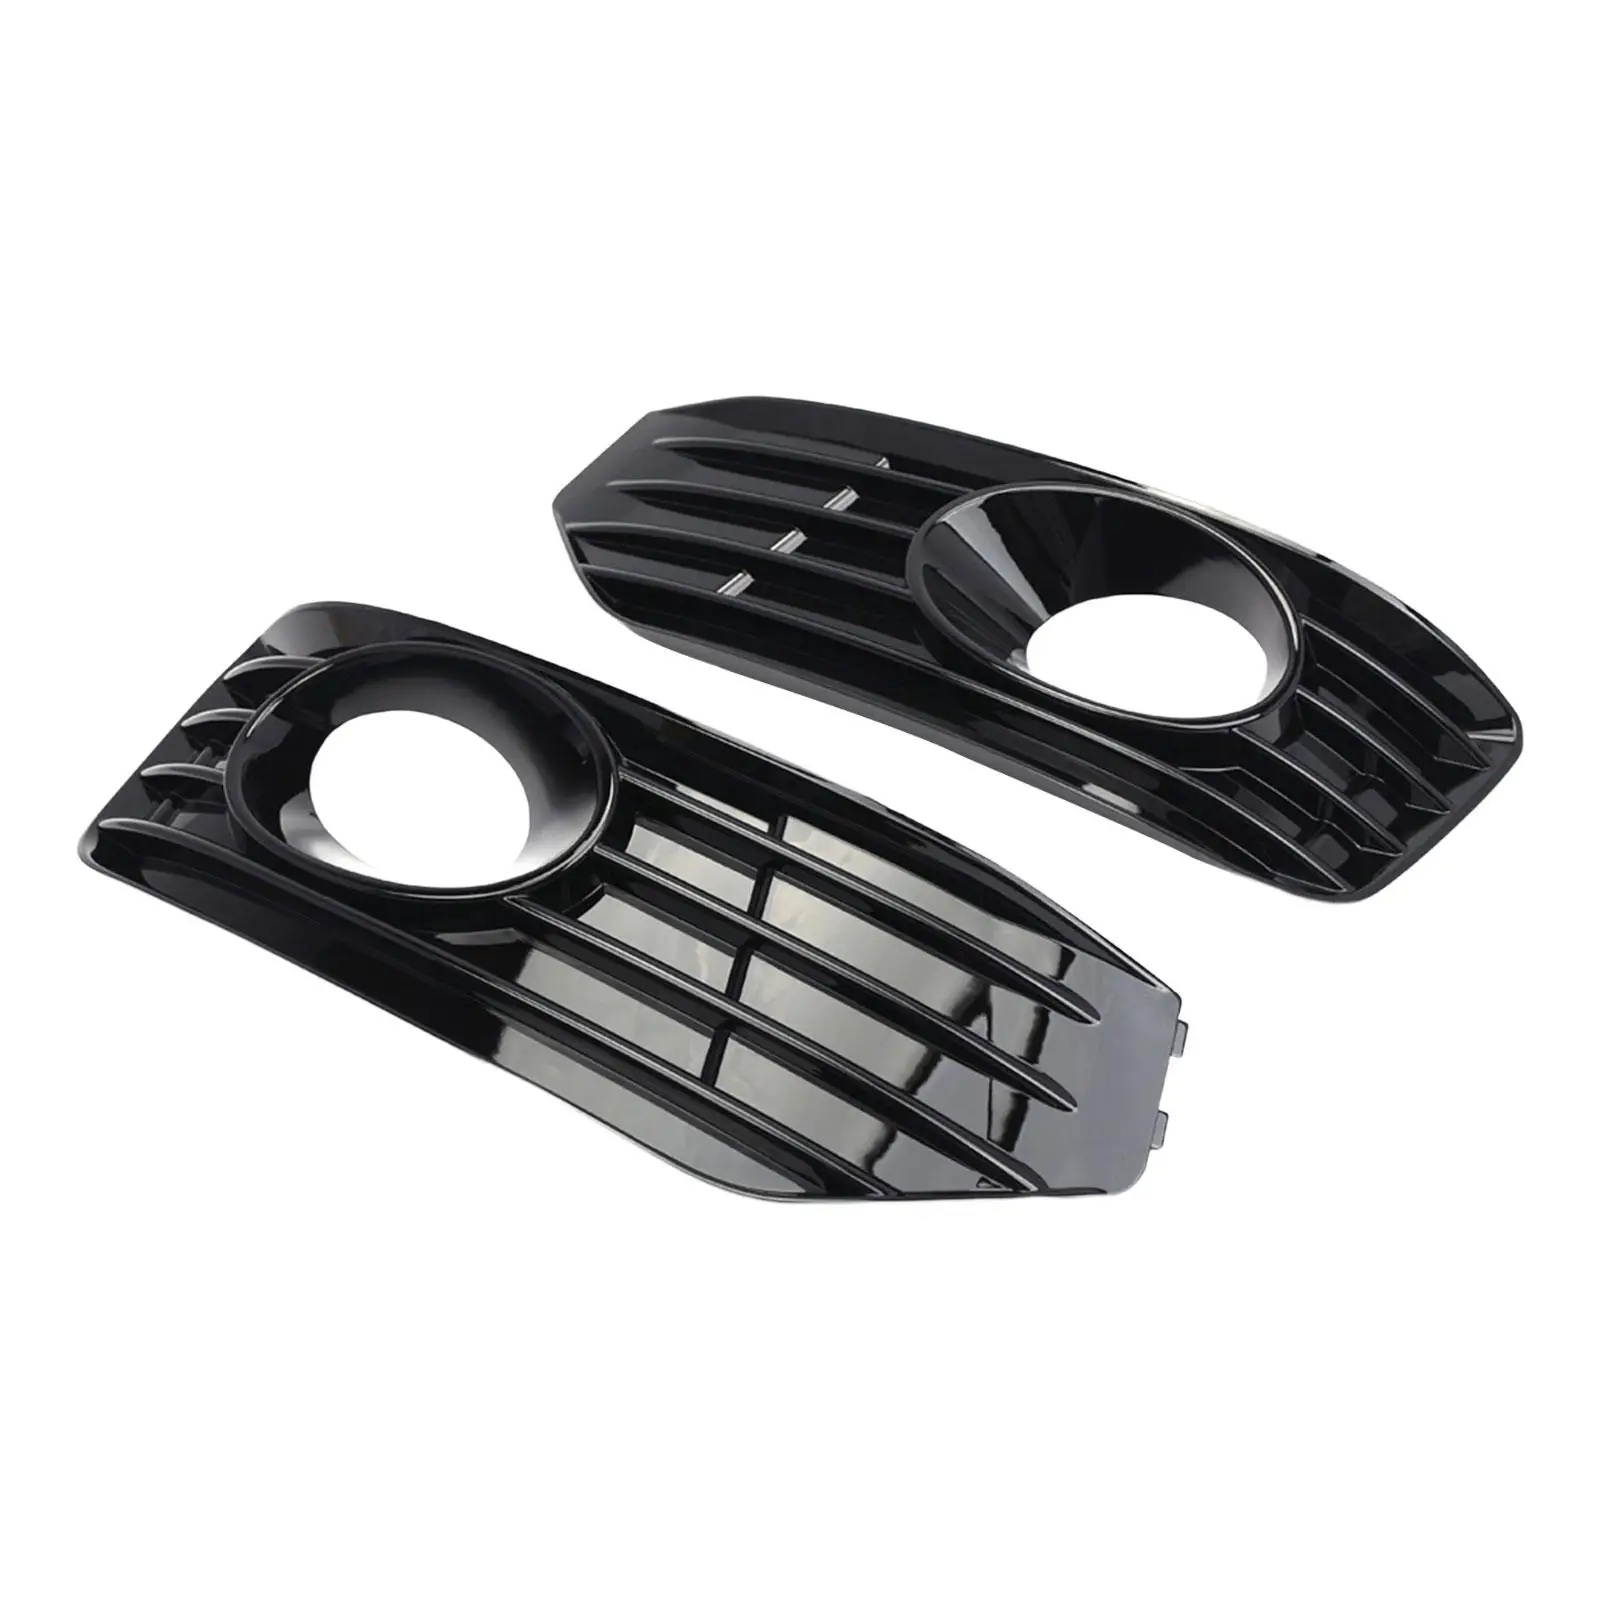 2x Fog Light Grille Covers Easy Installation Spare Parts Professional Replaces Fog Lamp Cover Insert for VW T5.1 Sportline